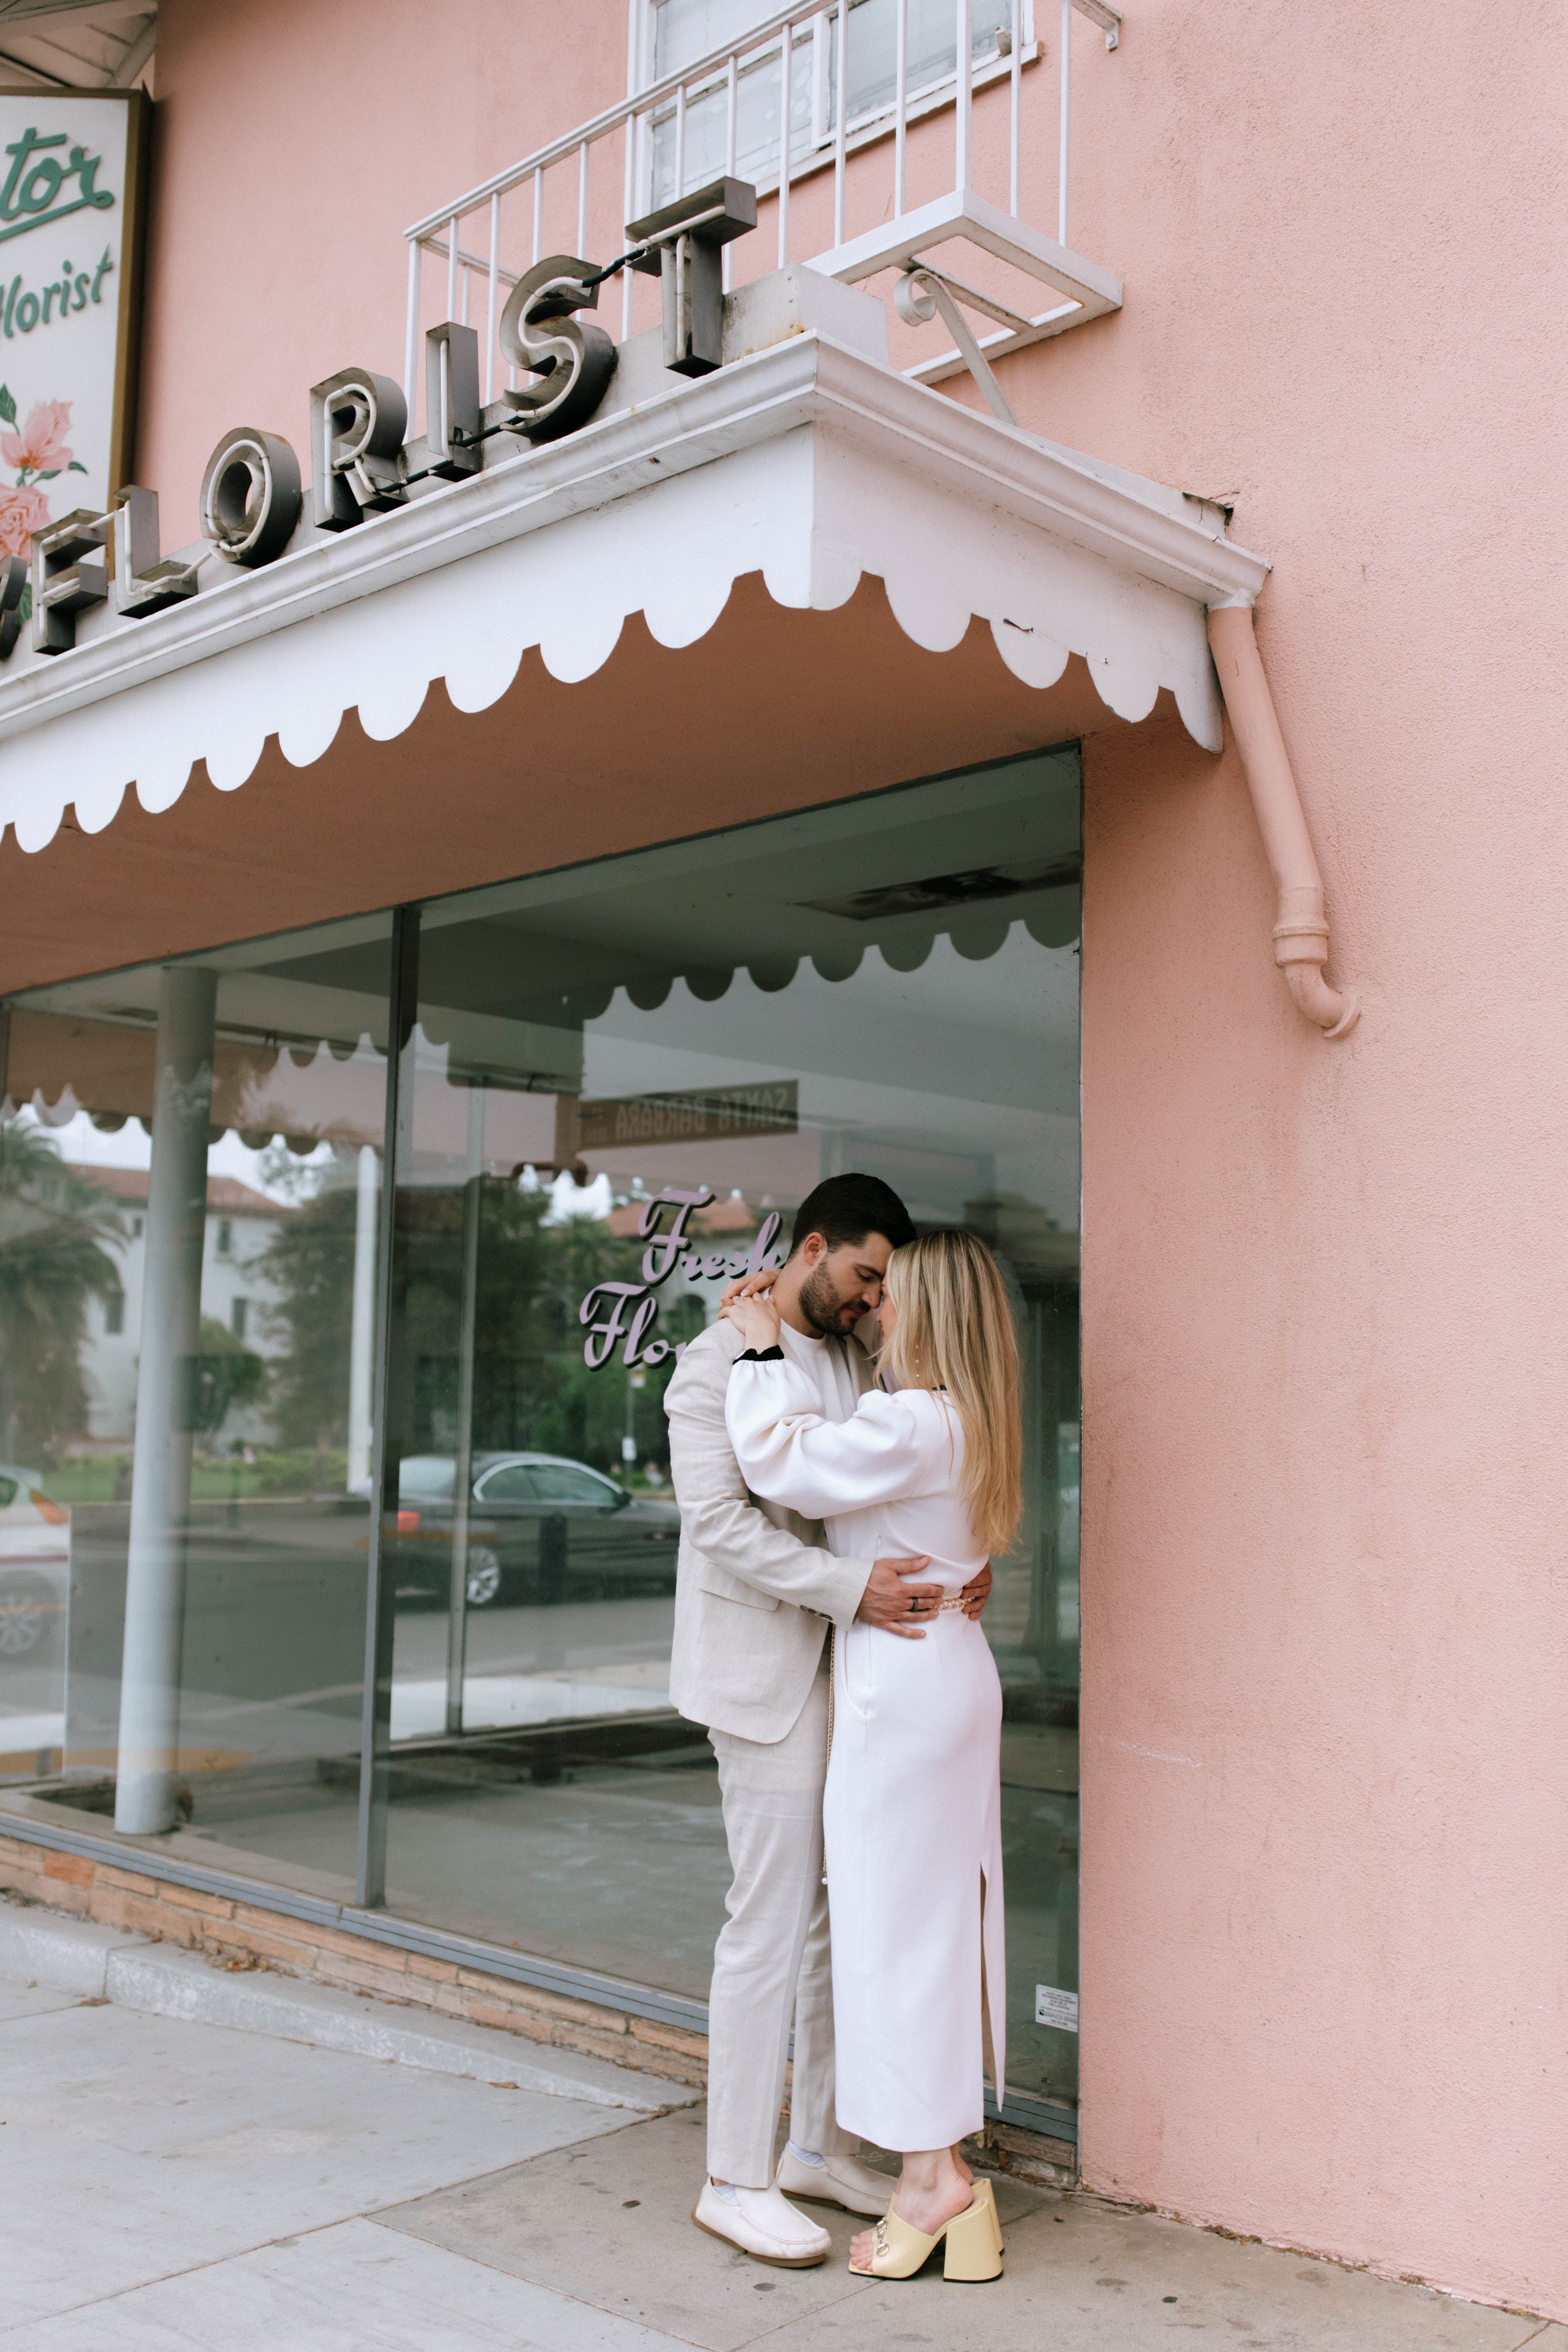 www.santabarbarawedding.com | Monique Bianca Photography | Downtown Santa Barbara | Valentino | Rowen Rose | The Engaged Couple In Front of a Pink Wall